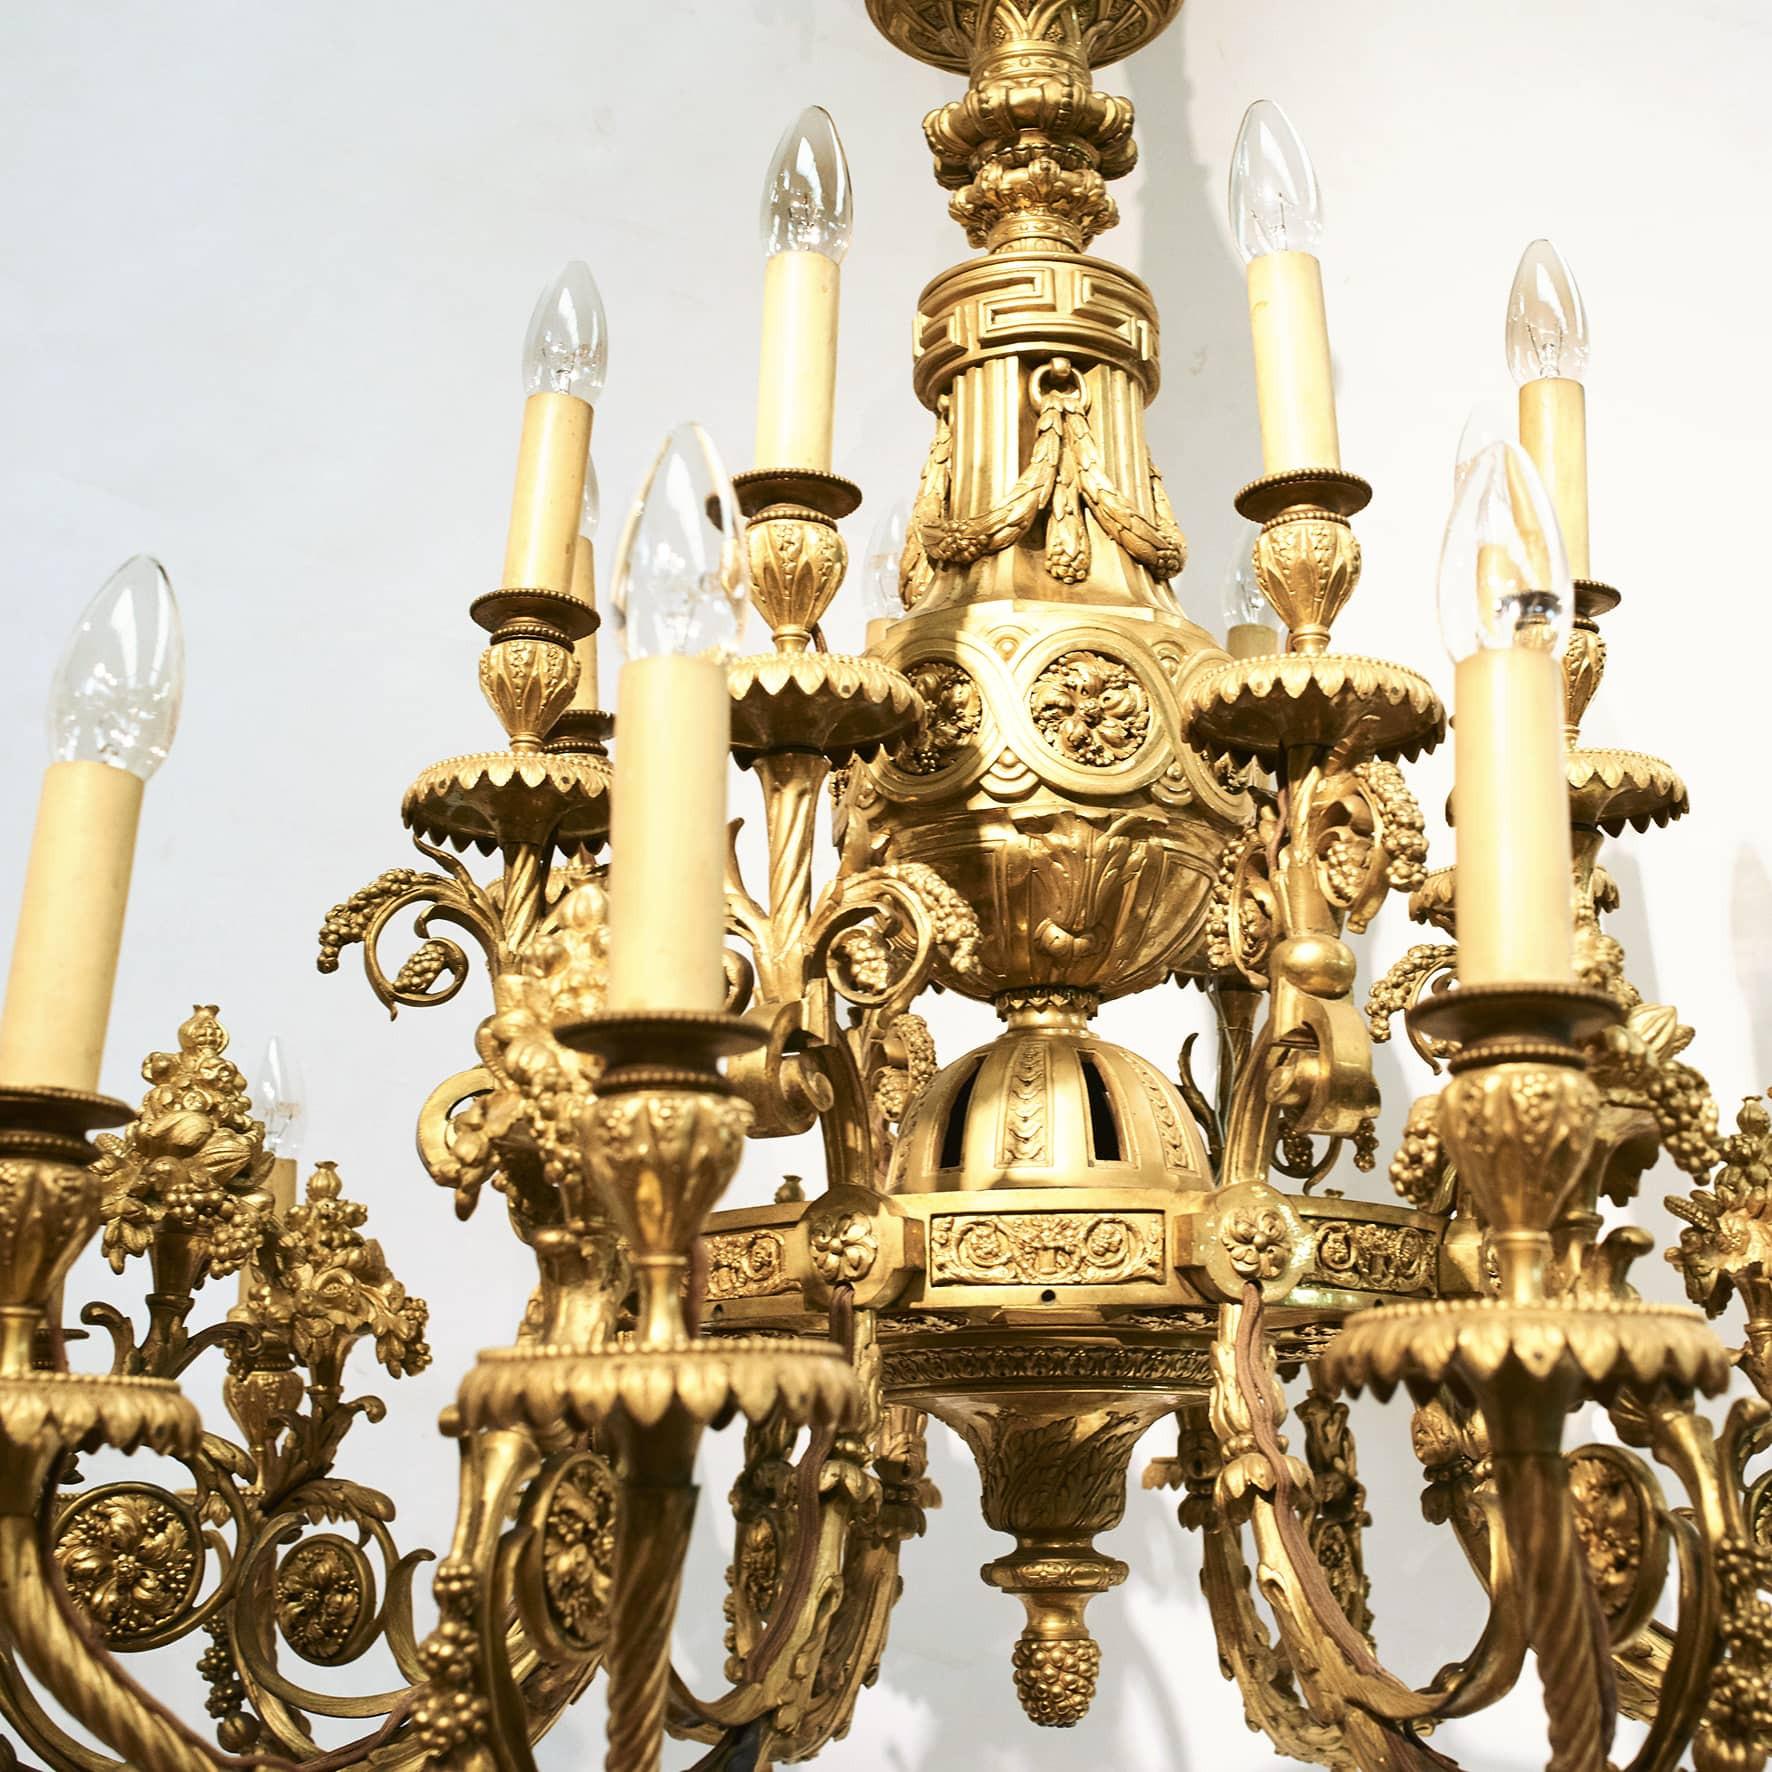 Rare large gilded twenty four light bronze chandelier in Louis XVI style, approx. 1860. Spectacular in size and quality.
The two tiered body is finely casted overall with ornaments of leaves and clusters of grapes.
Crown decorated with ram